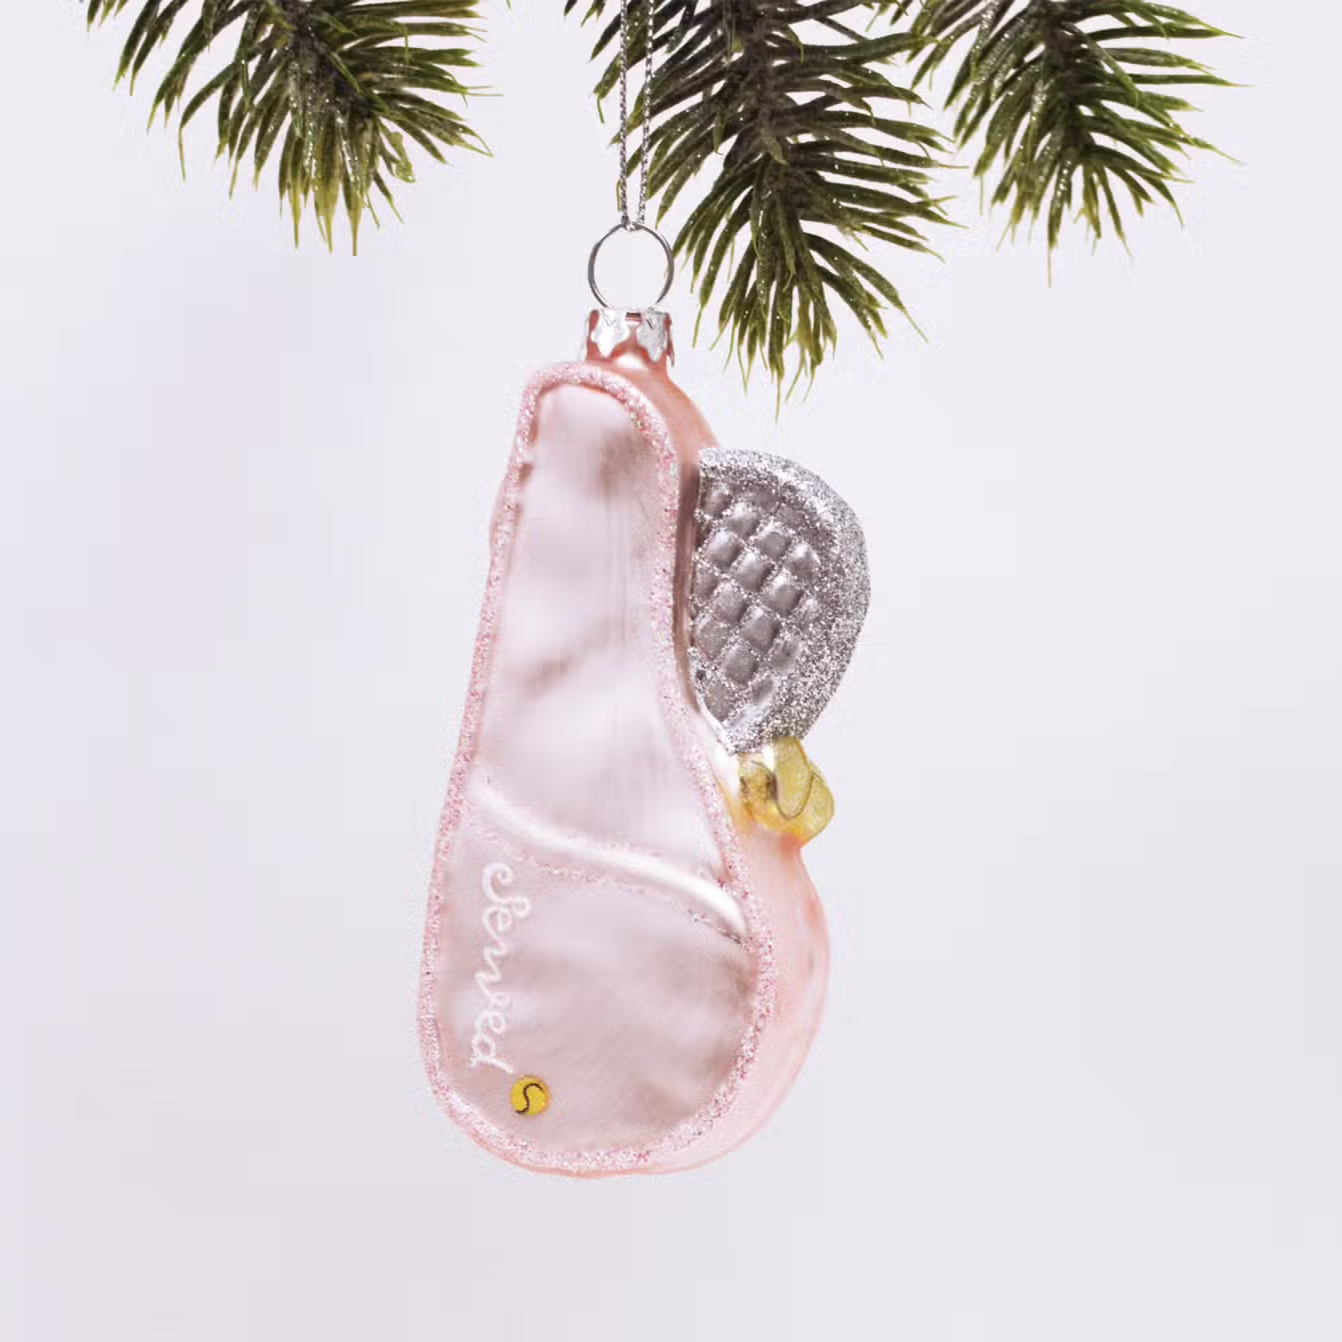 pink tennis racket bag shaped ornament with a silver and glittery racket sticking out of the bag. Ornament is hanging from tree.